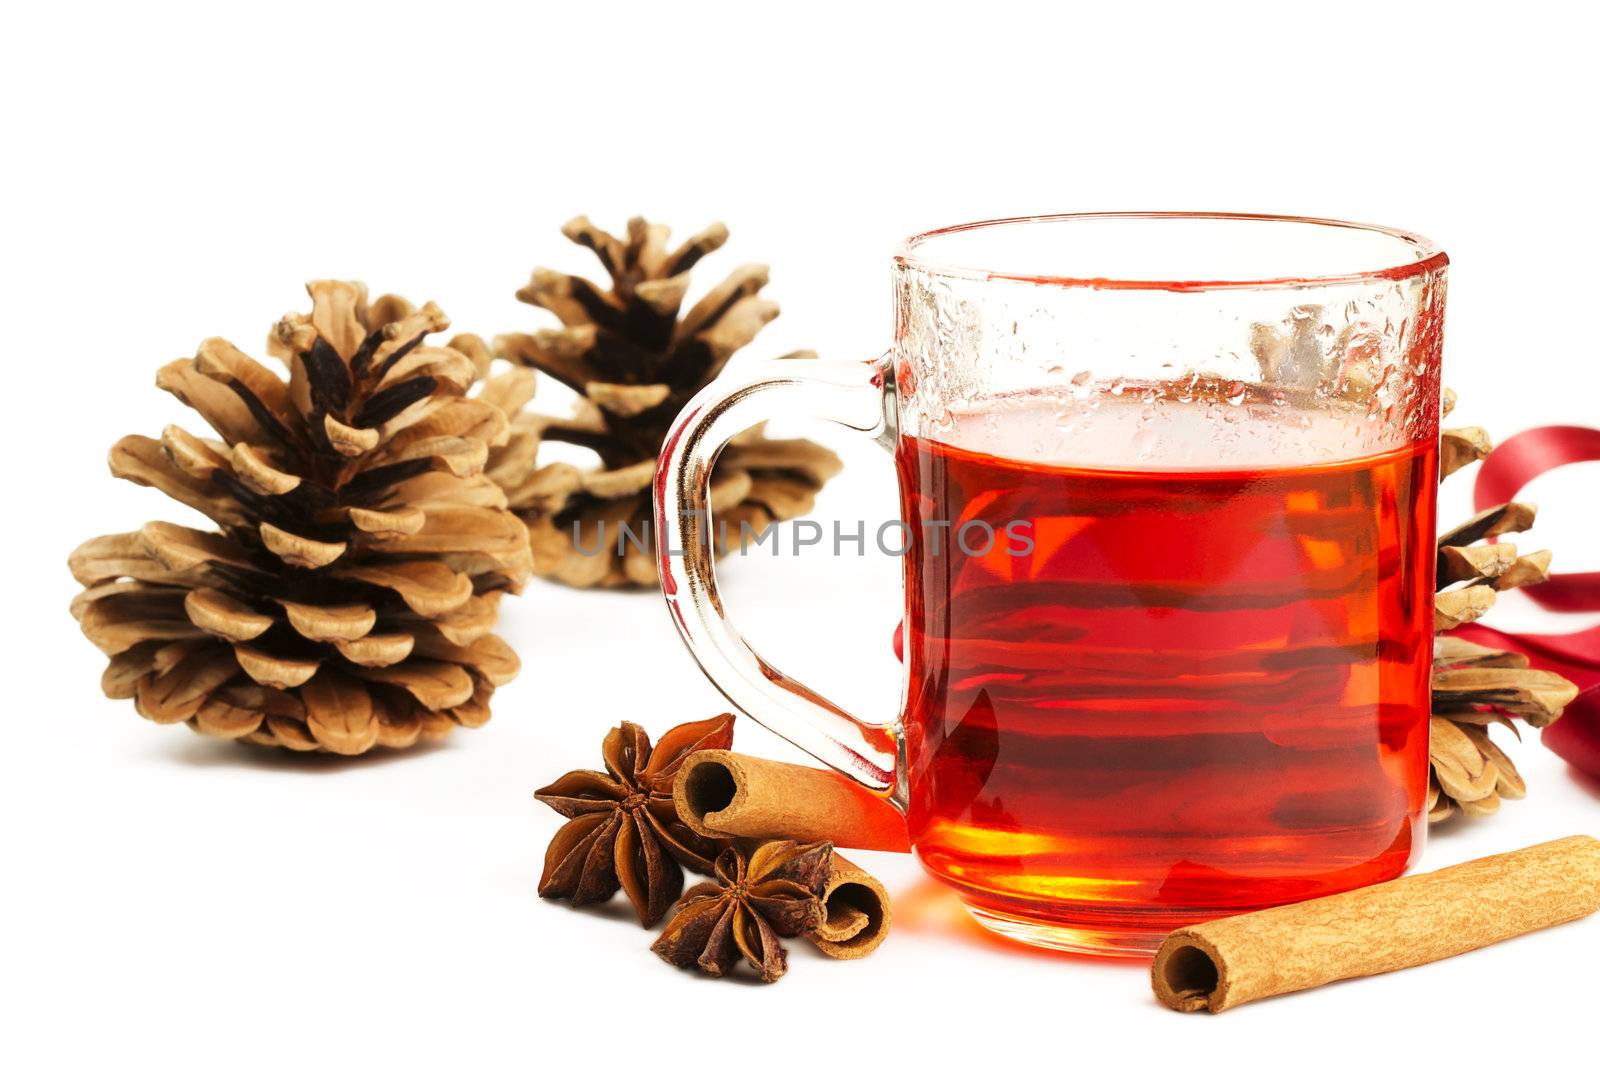 red tea in a glass, cinnamon sticks, star anise and some conifer cones on white background